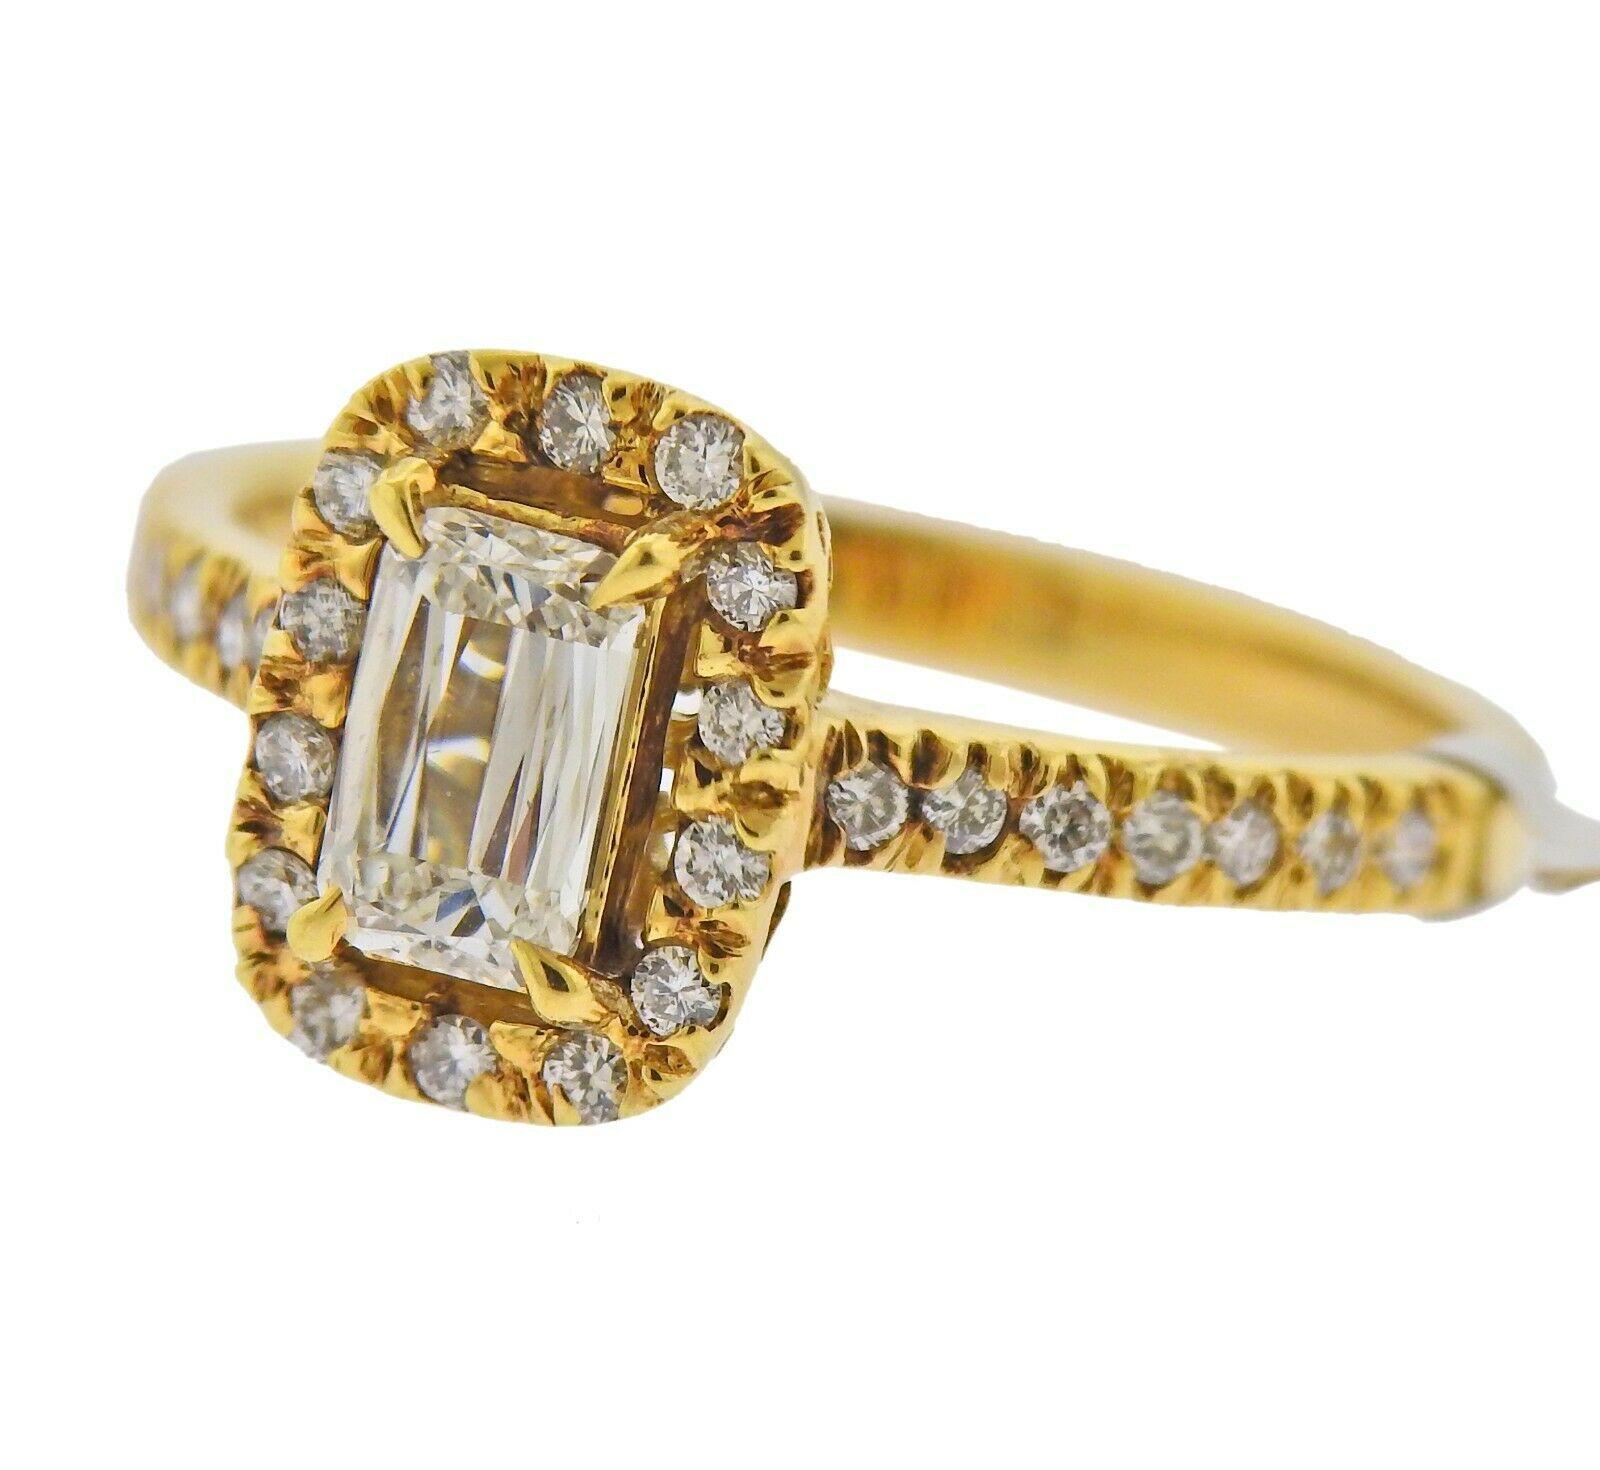 18k yellow gold ring by Ashoka. Set with a total of 0.88ctw of Si1/H diamonds. Ring size - 6.75, ring top - 11mm x 8.5mm. Marked -  18kt,  Ashoka, BG. Weight - 3.9 grams. Brand new store sample, retail $7400
